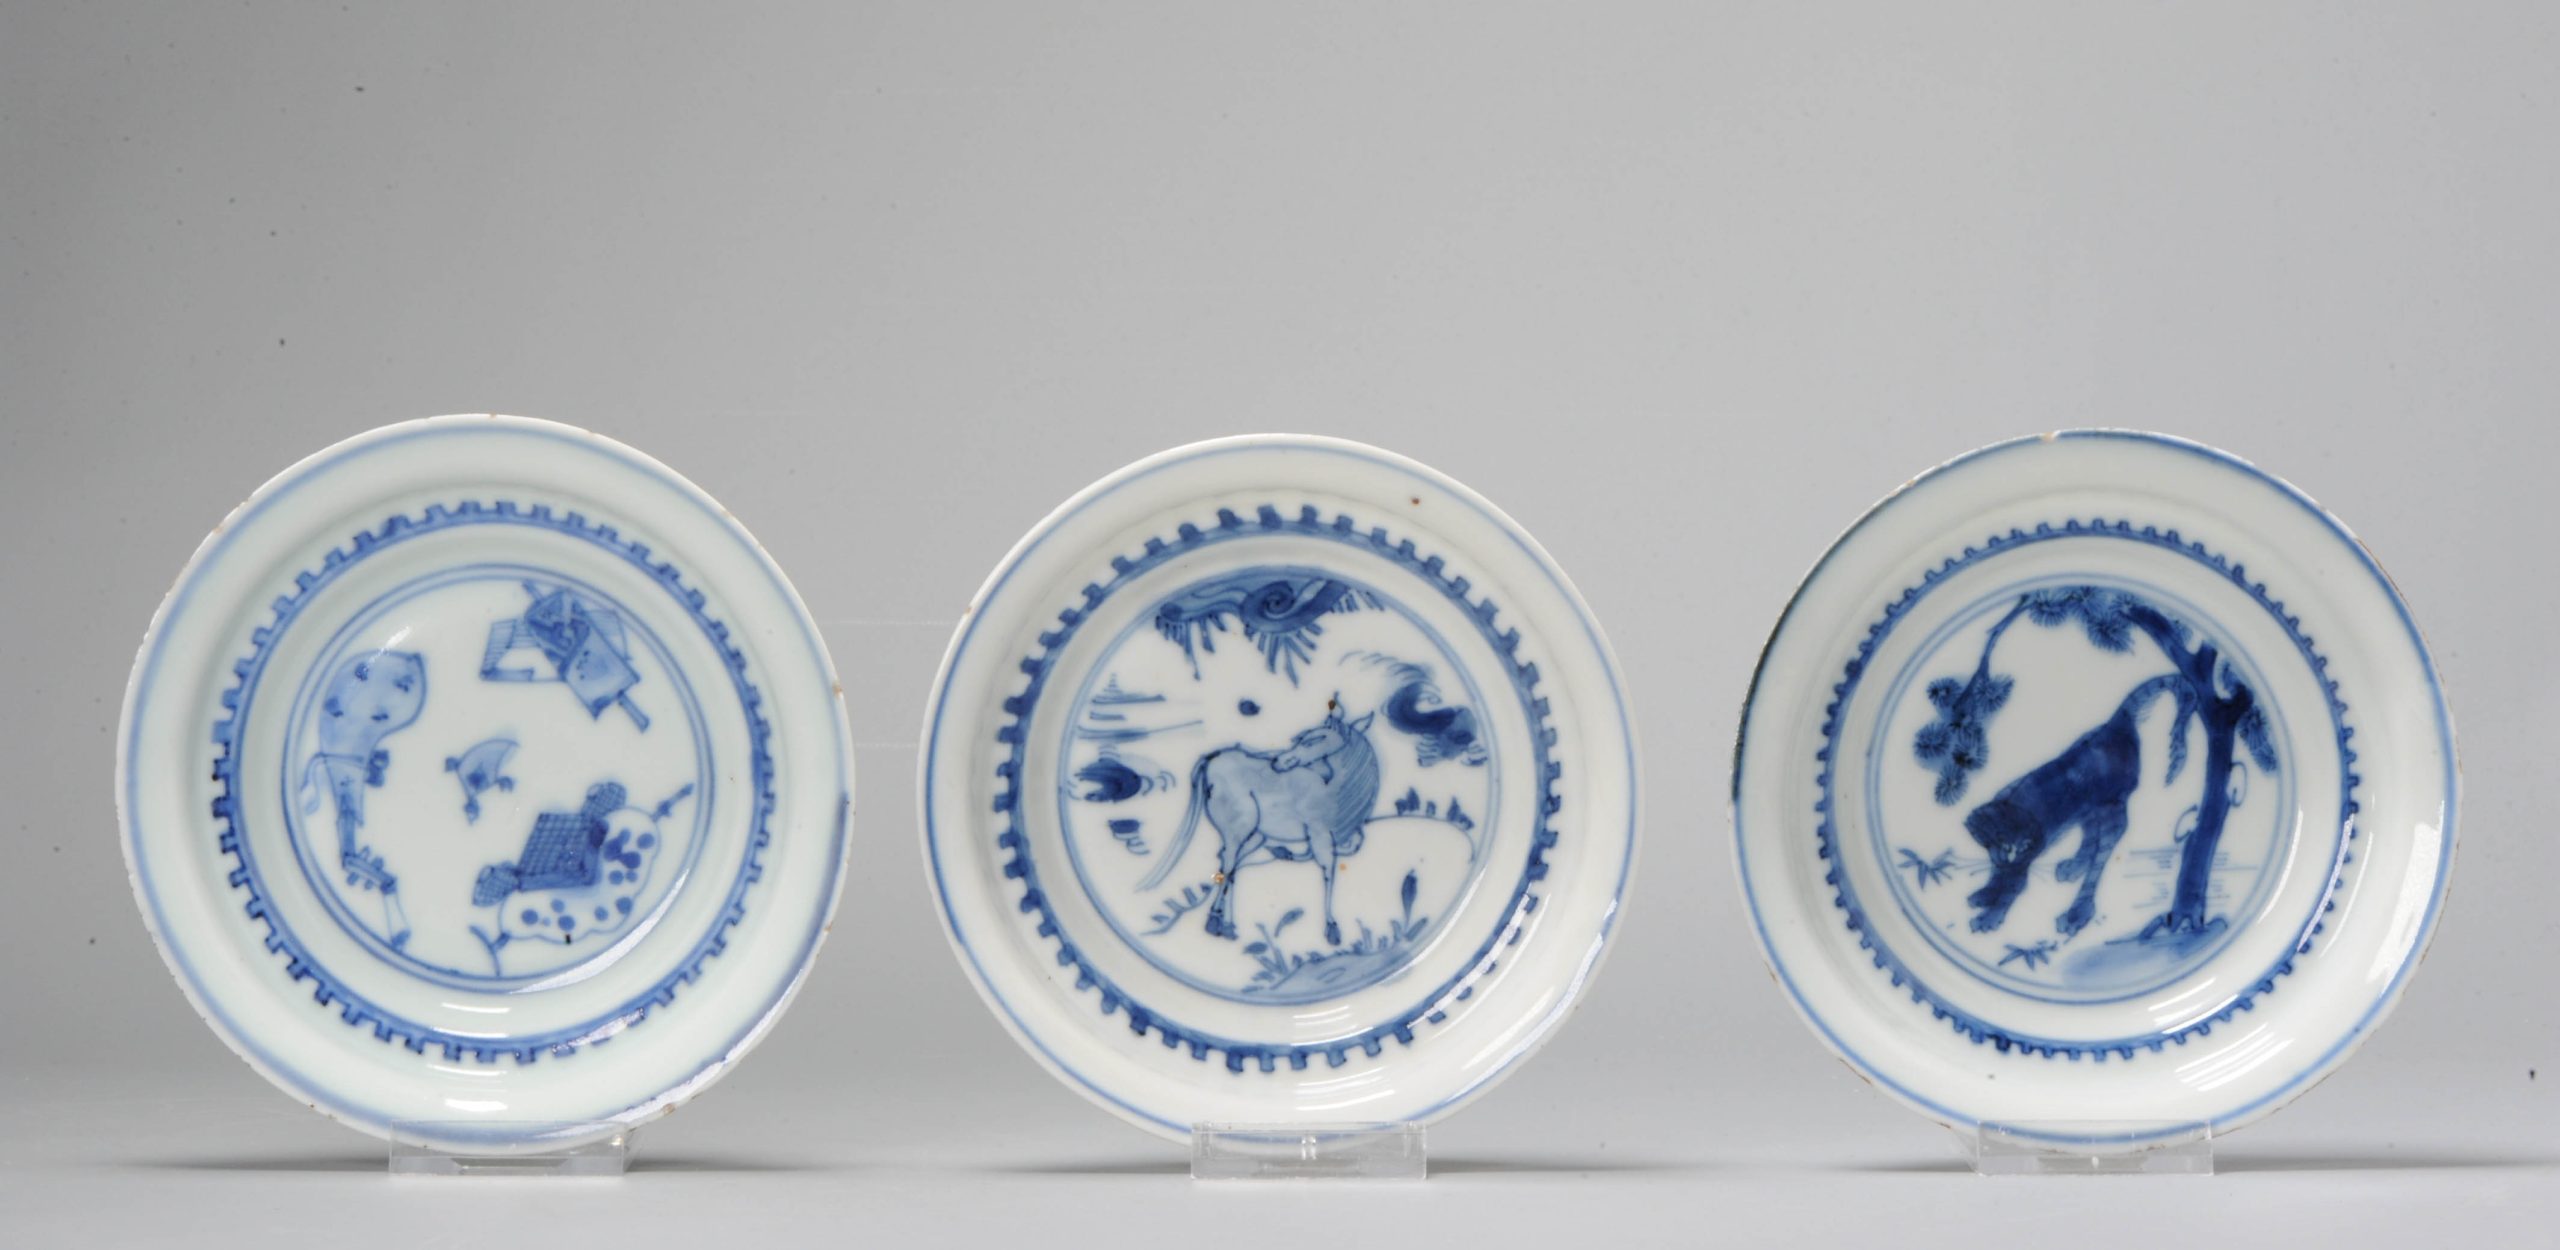 Set #3 Ca 1600-1660 Chinese Porcelain Ming Period Kosometsuke Plates Tiger and Horse